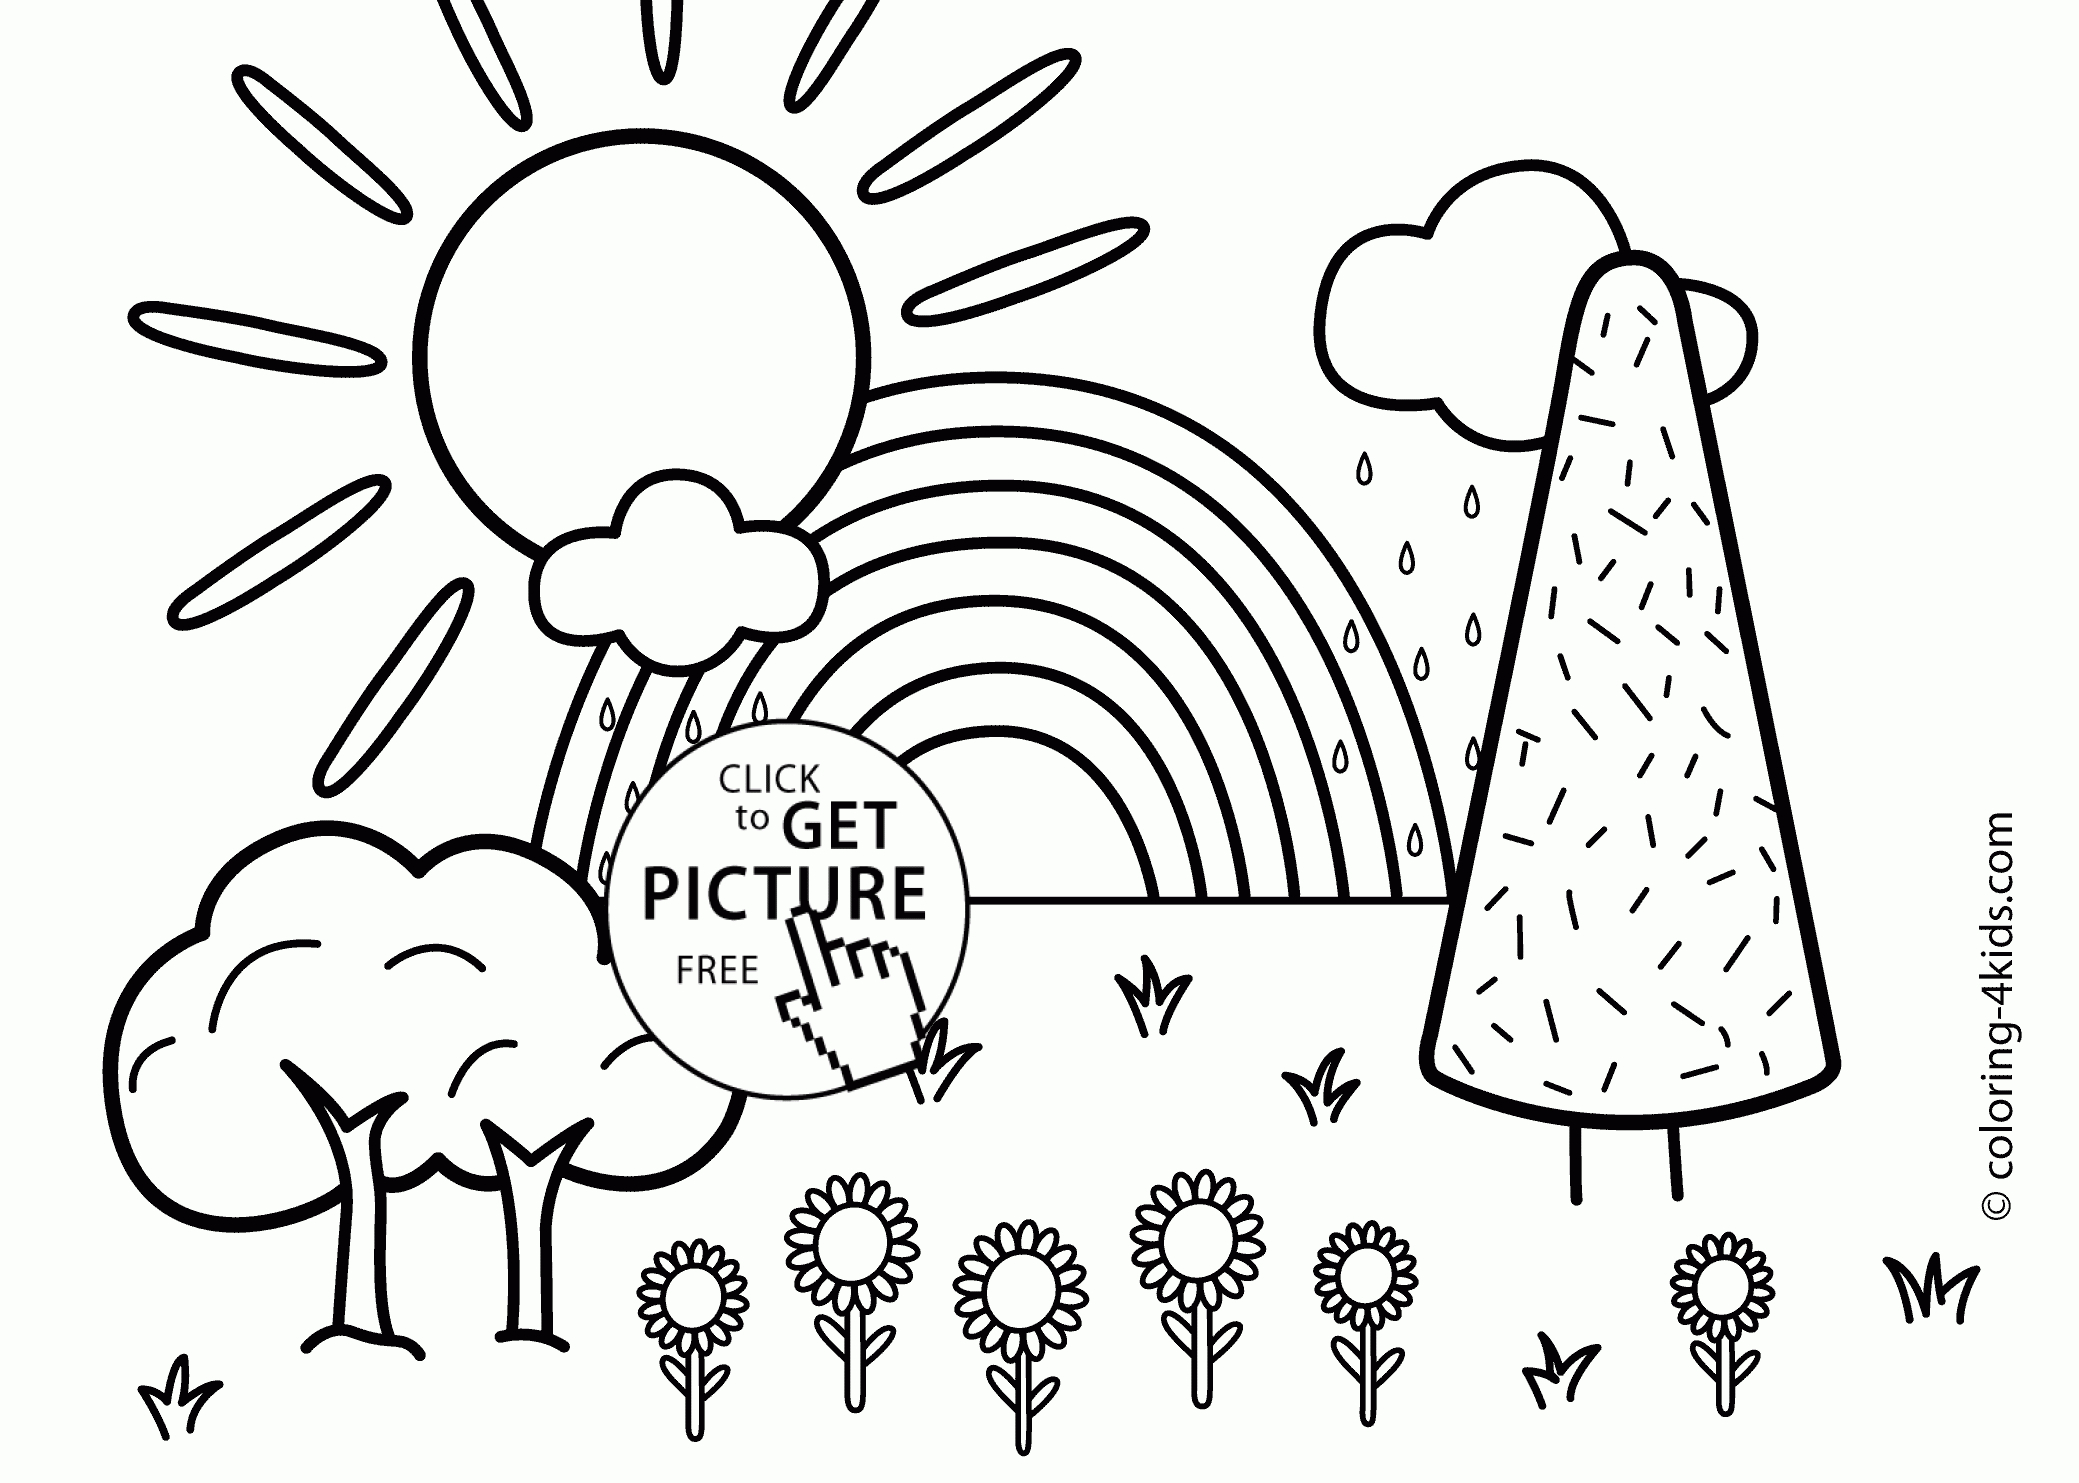 Nature Coloring Page For Kids With Rainbow, Printable Free | Coloing - Free Printable Nature Coloring Pages